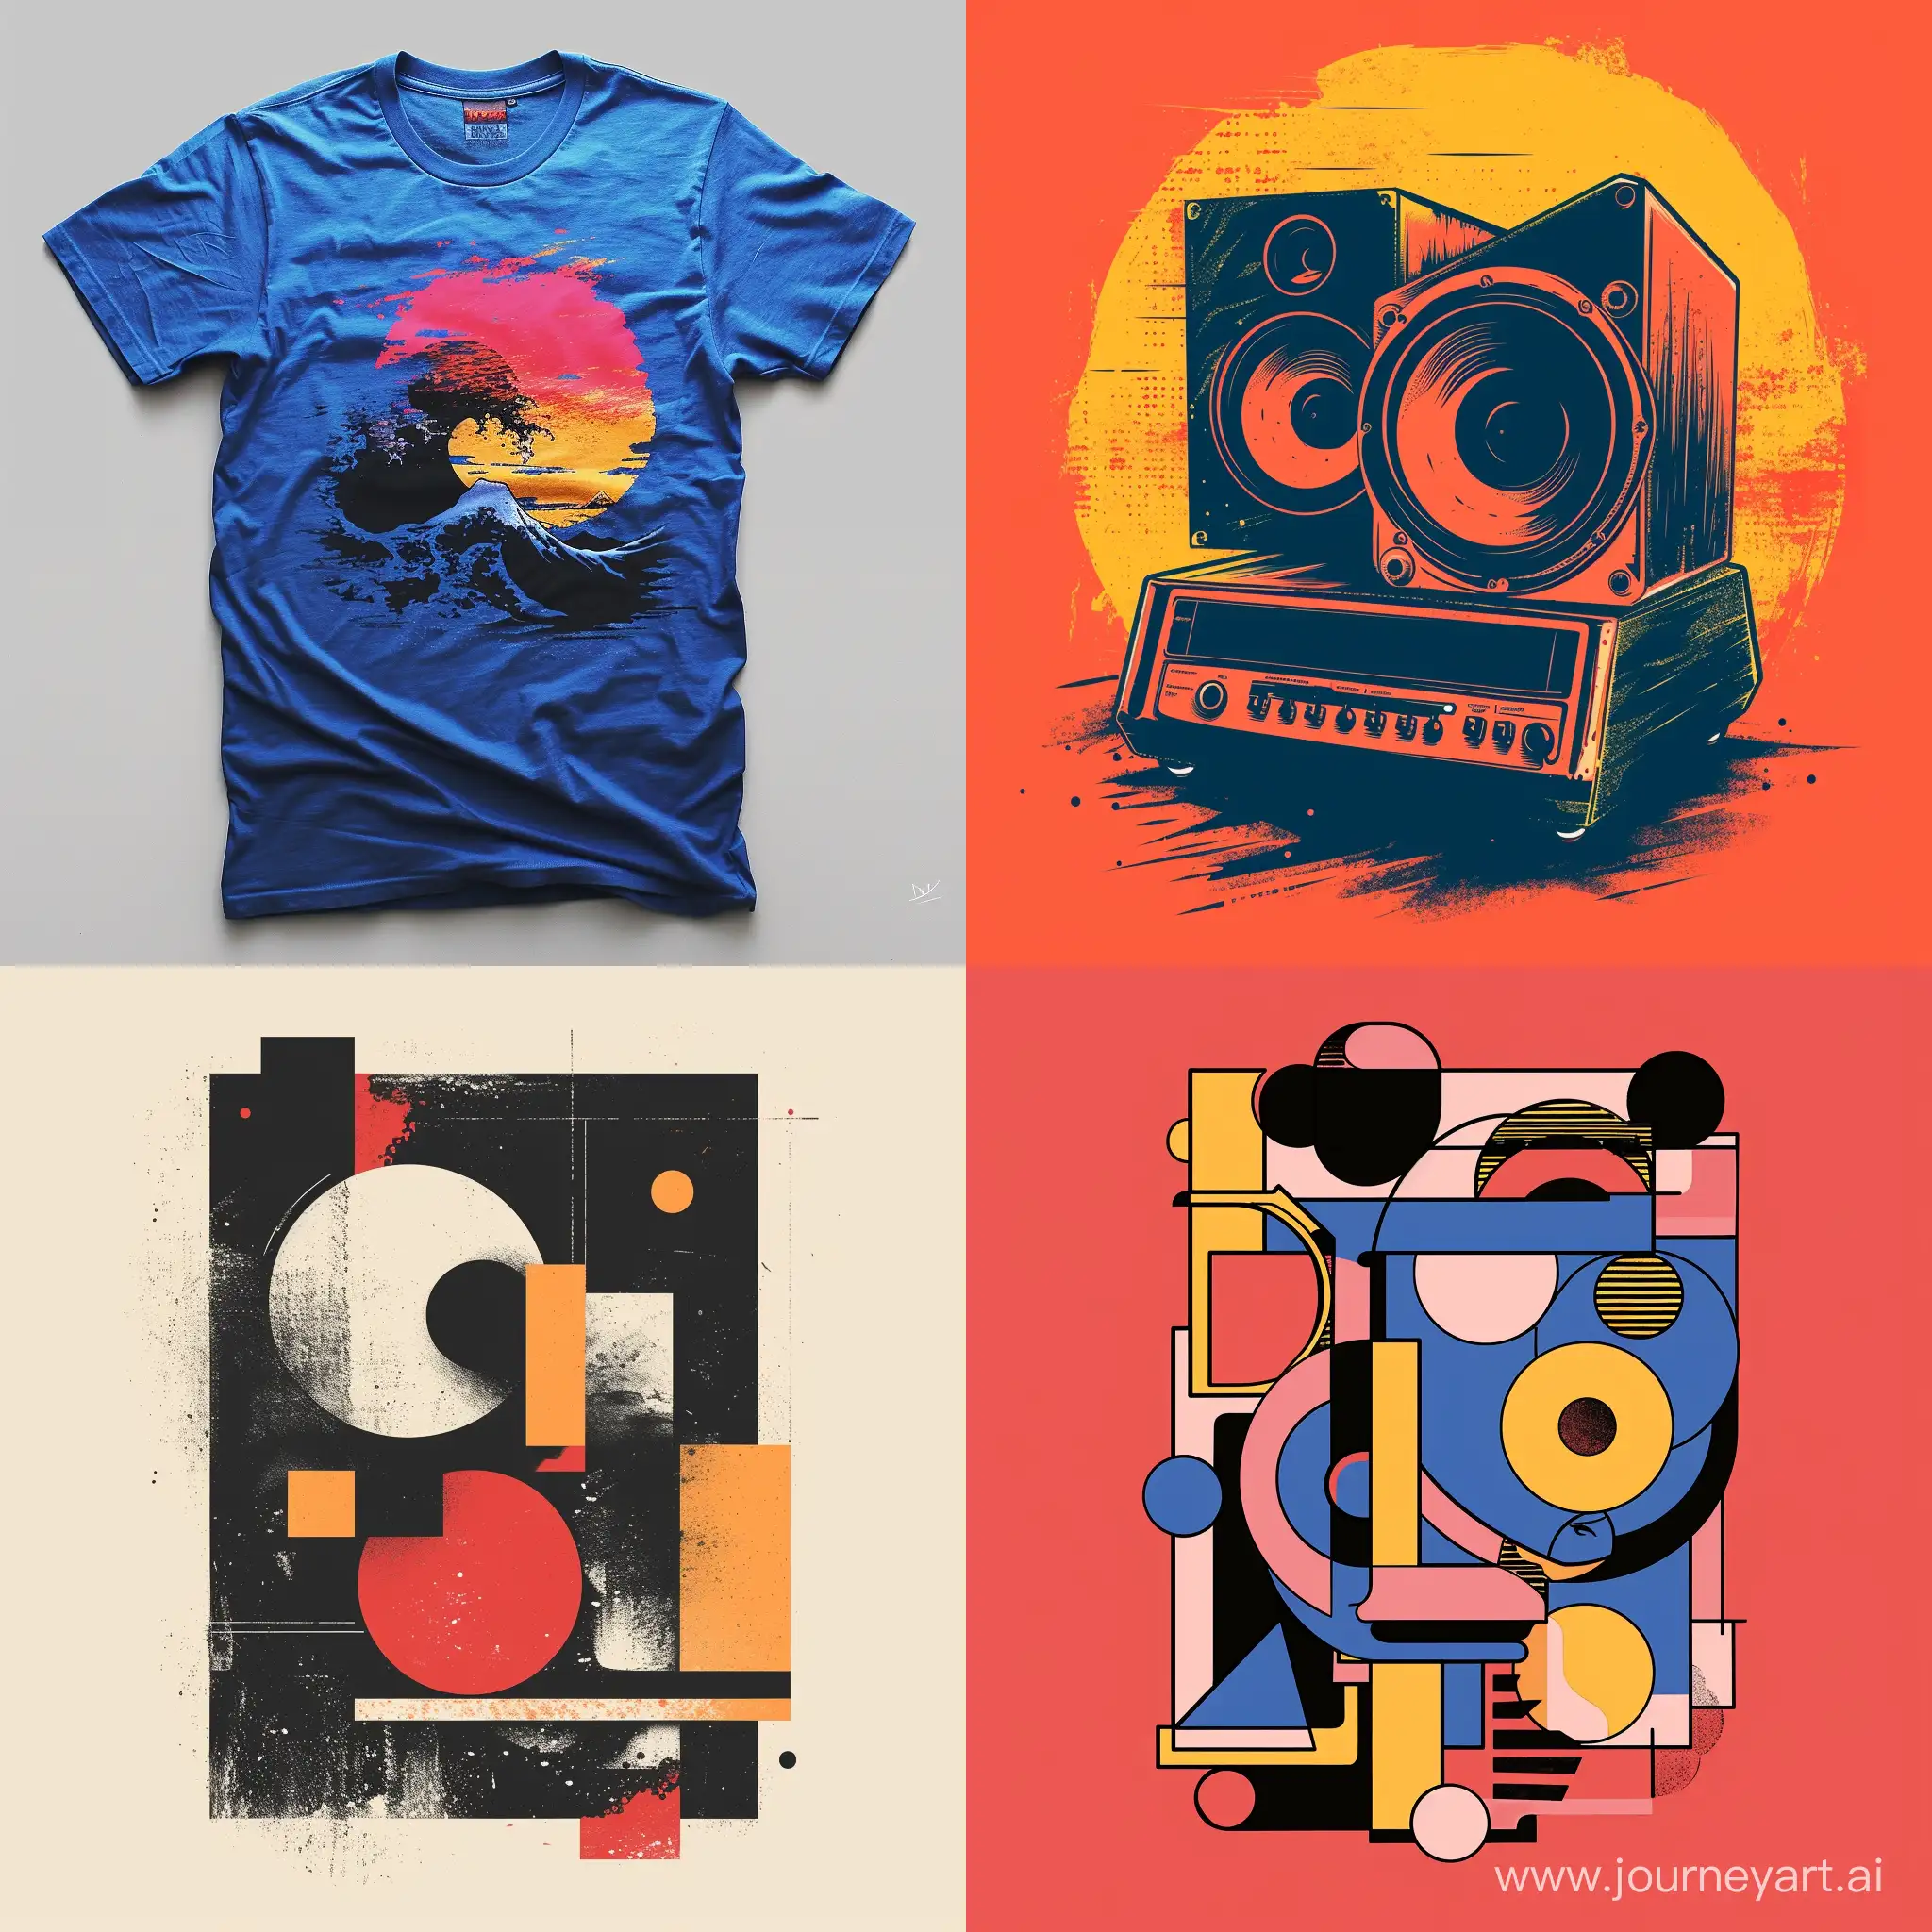 Colorful-2000s-Tshirt-Design-Featuring-Vibrant-Patterns-and-Graphics